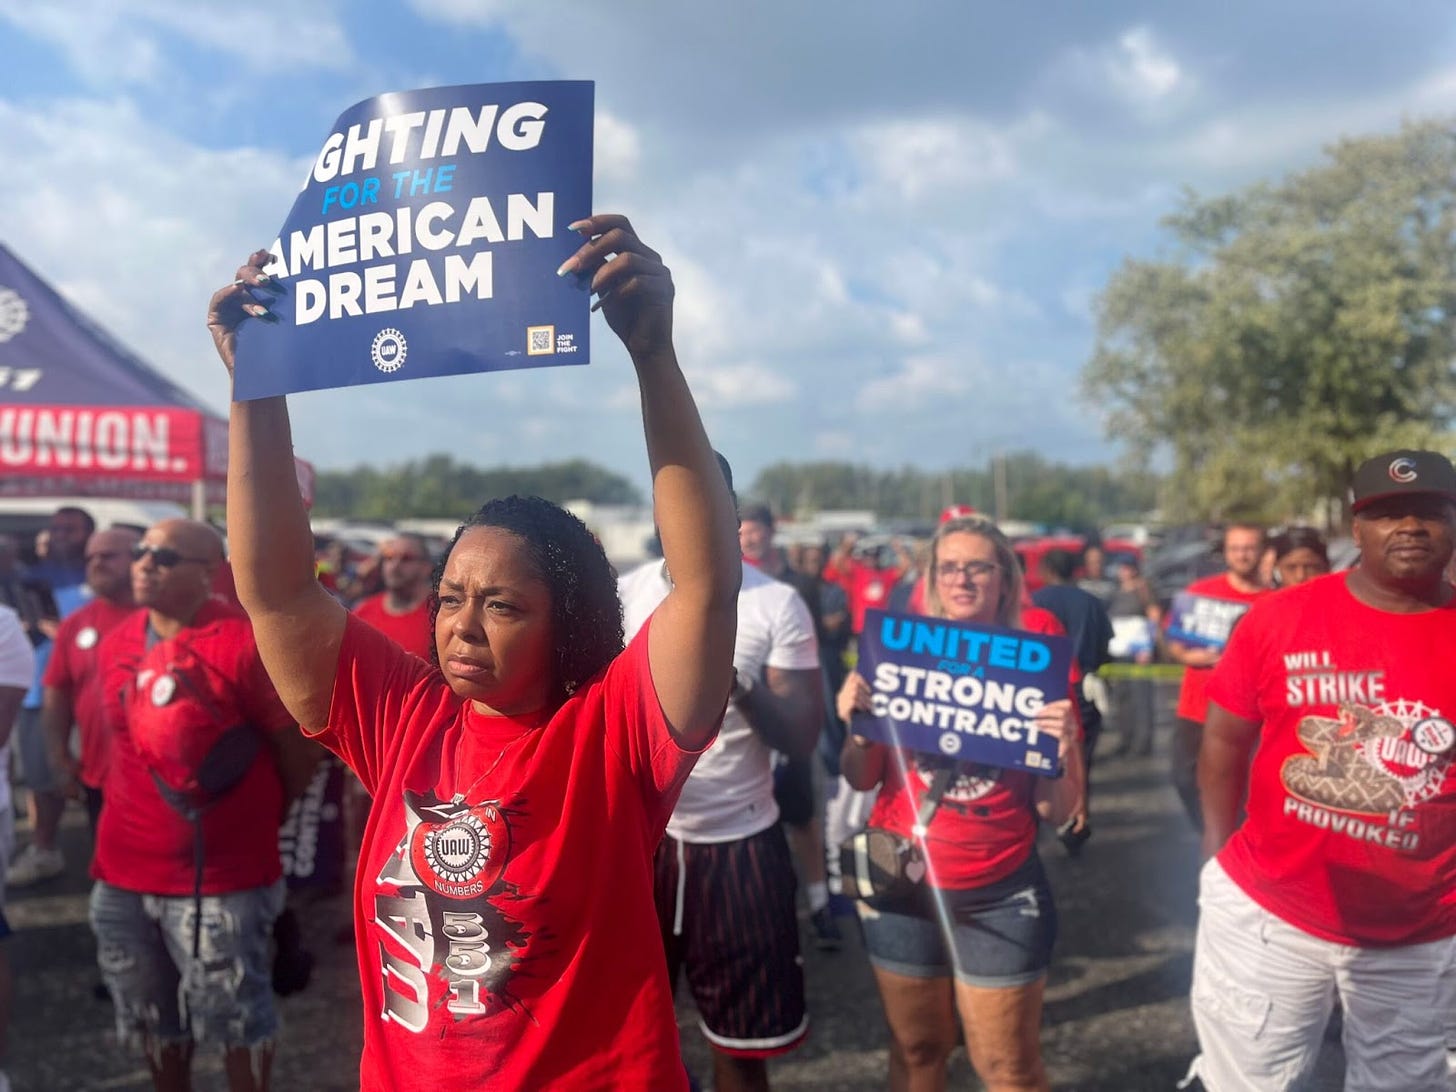 A Black woman wearing a red shirt stands in front of other people wearing red UAW shirts holding blue posters reading "Fighting for the American dream"